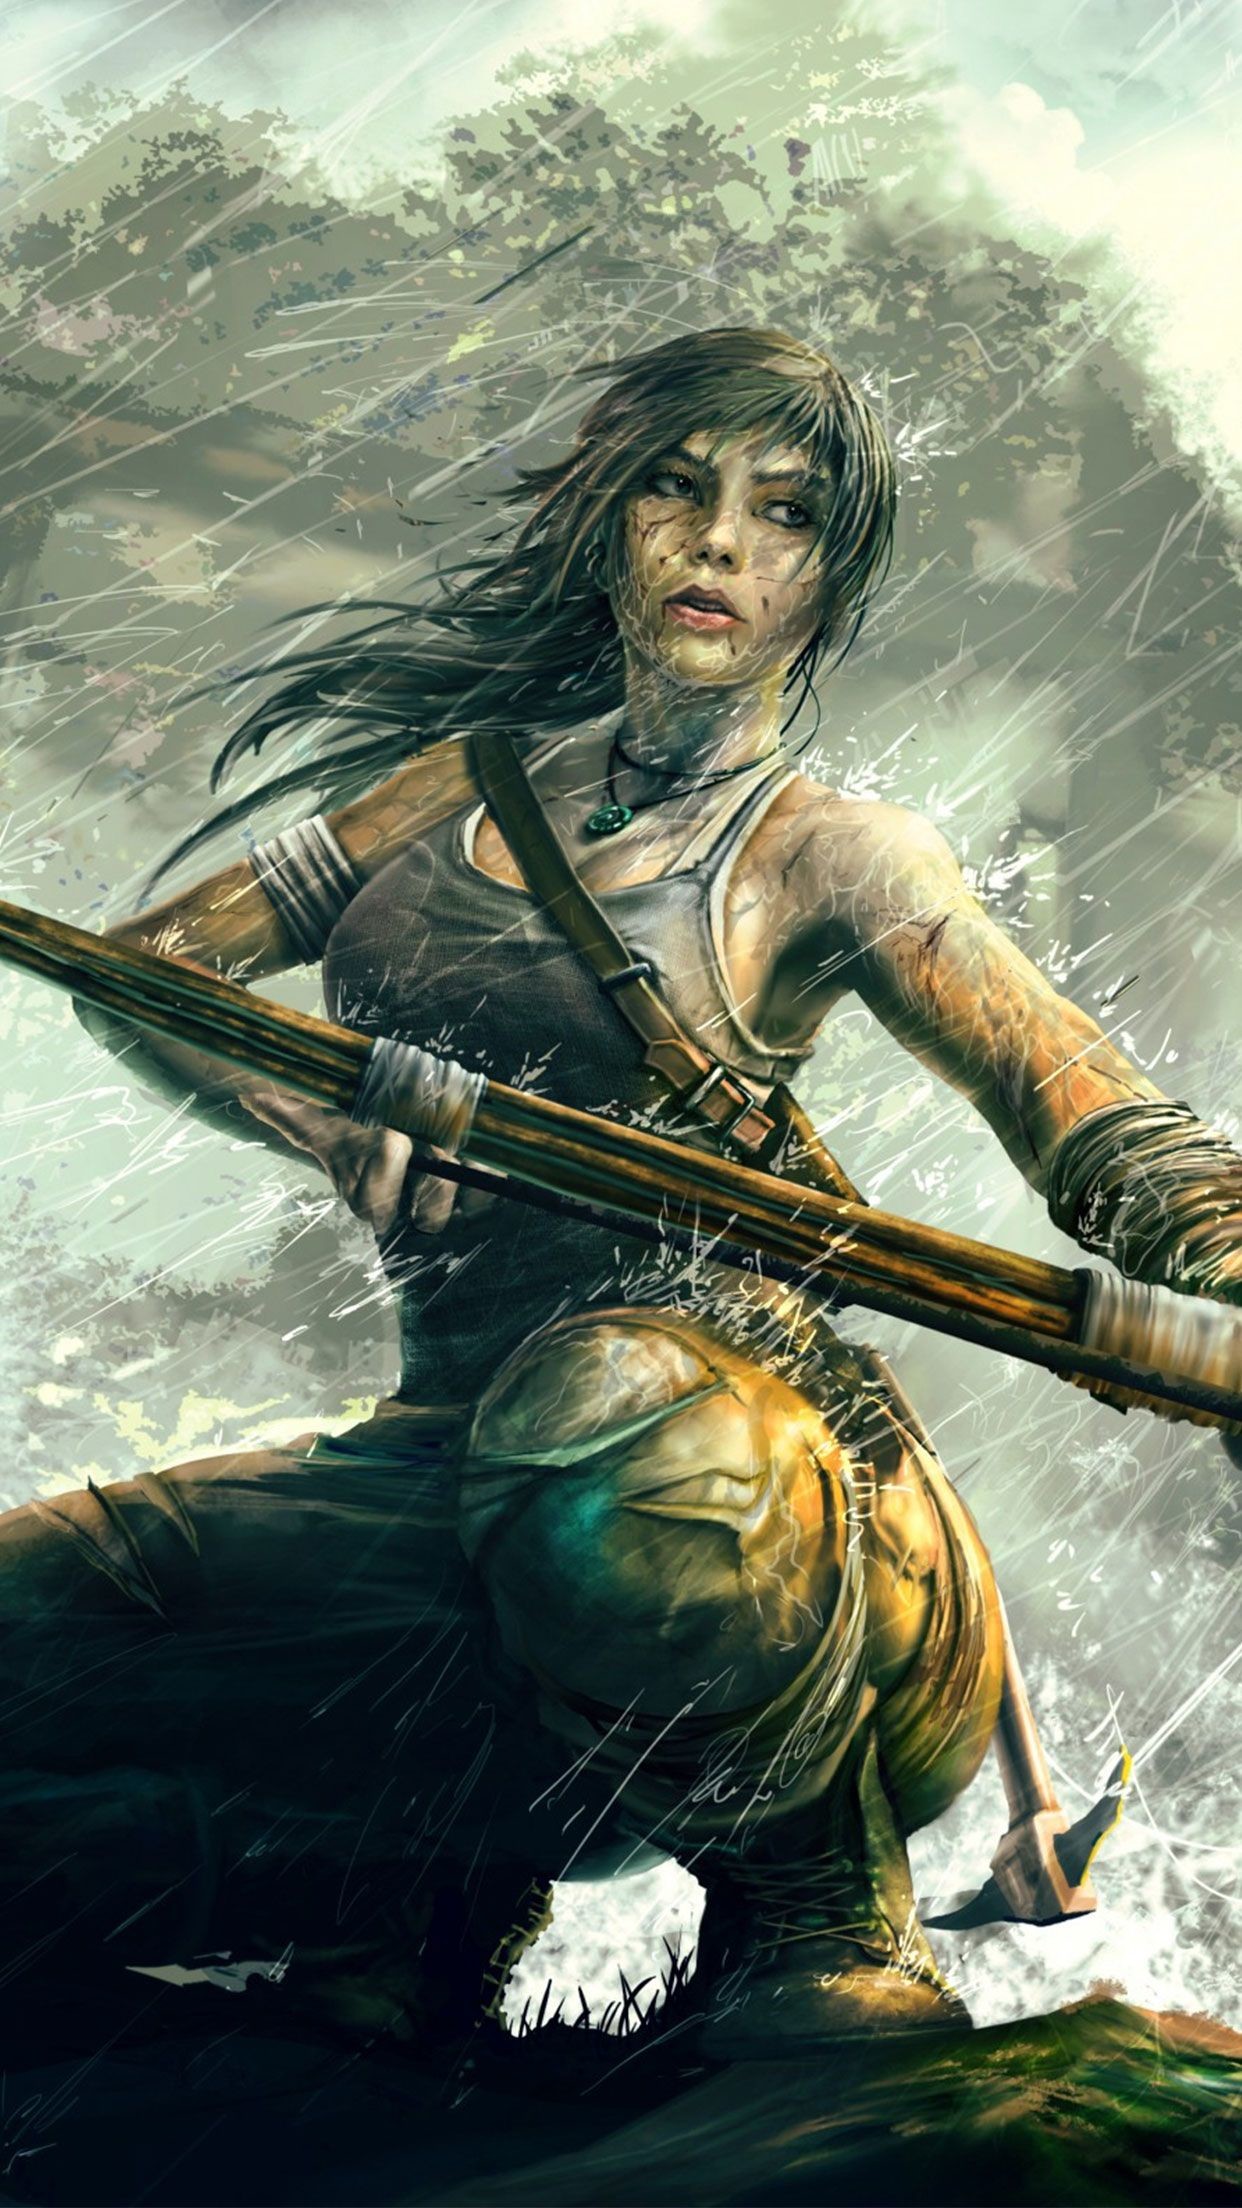 1242x2208 Tomb Raider Lara Croft game wallpaper for #Iphone #android #tombraider  #laracroft #game #wallpaper check out more on wallzapp.com